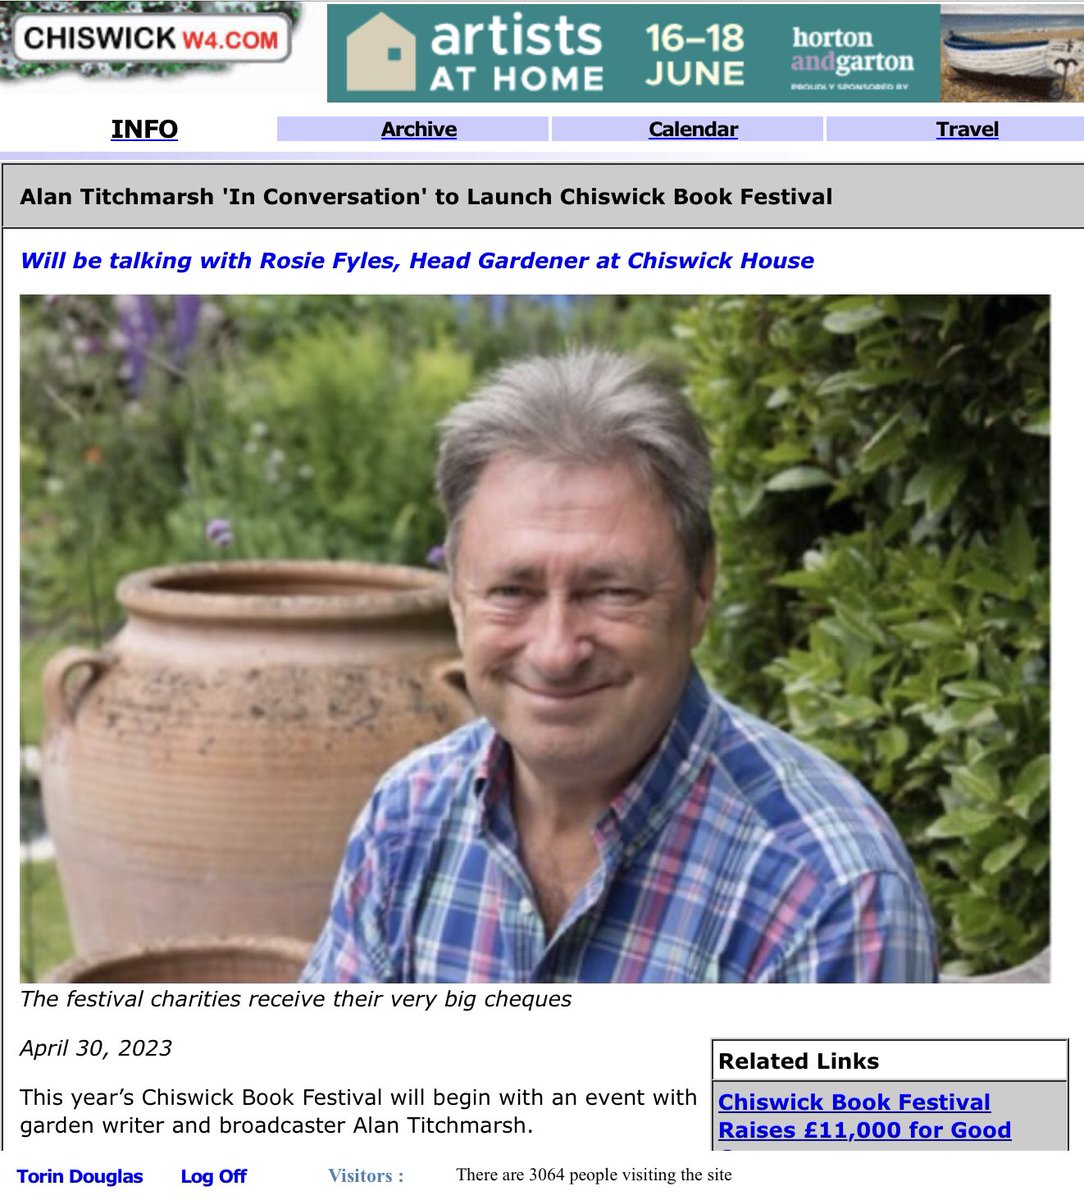 Alan Titchmarsh in conversation with Rosie Fyles, head of gardens @Chiswick_House at launch of #ChiswickBookFest in September. @TitchmarshShow @RosieFyles See @ChiswickW4 story: 
chiswickw4.com/default.asp?se…